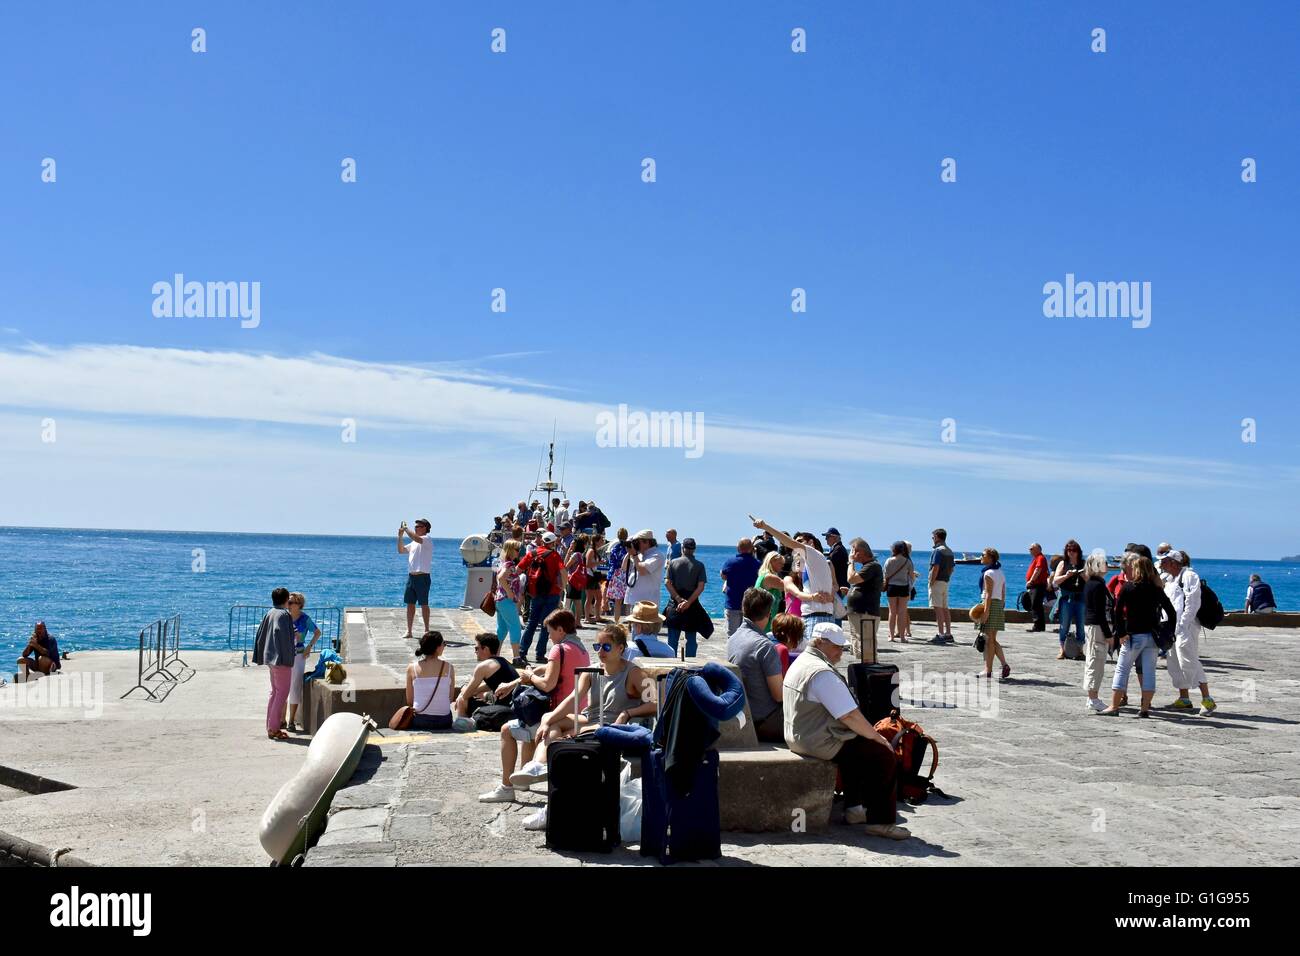 Tourists waiting at the ferry port for the ferry to arrive in Positano Italy Stock Photo